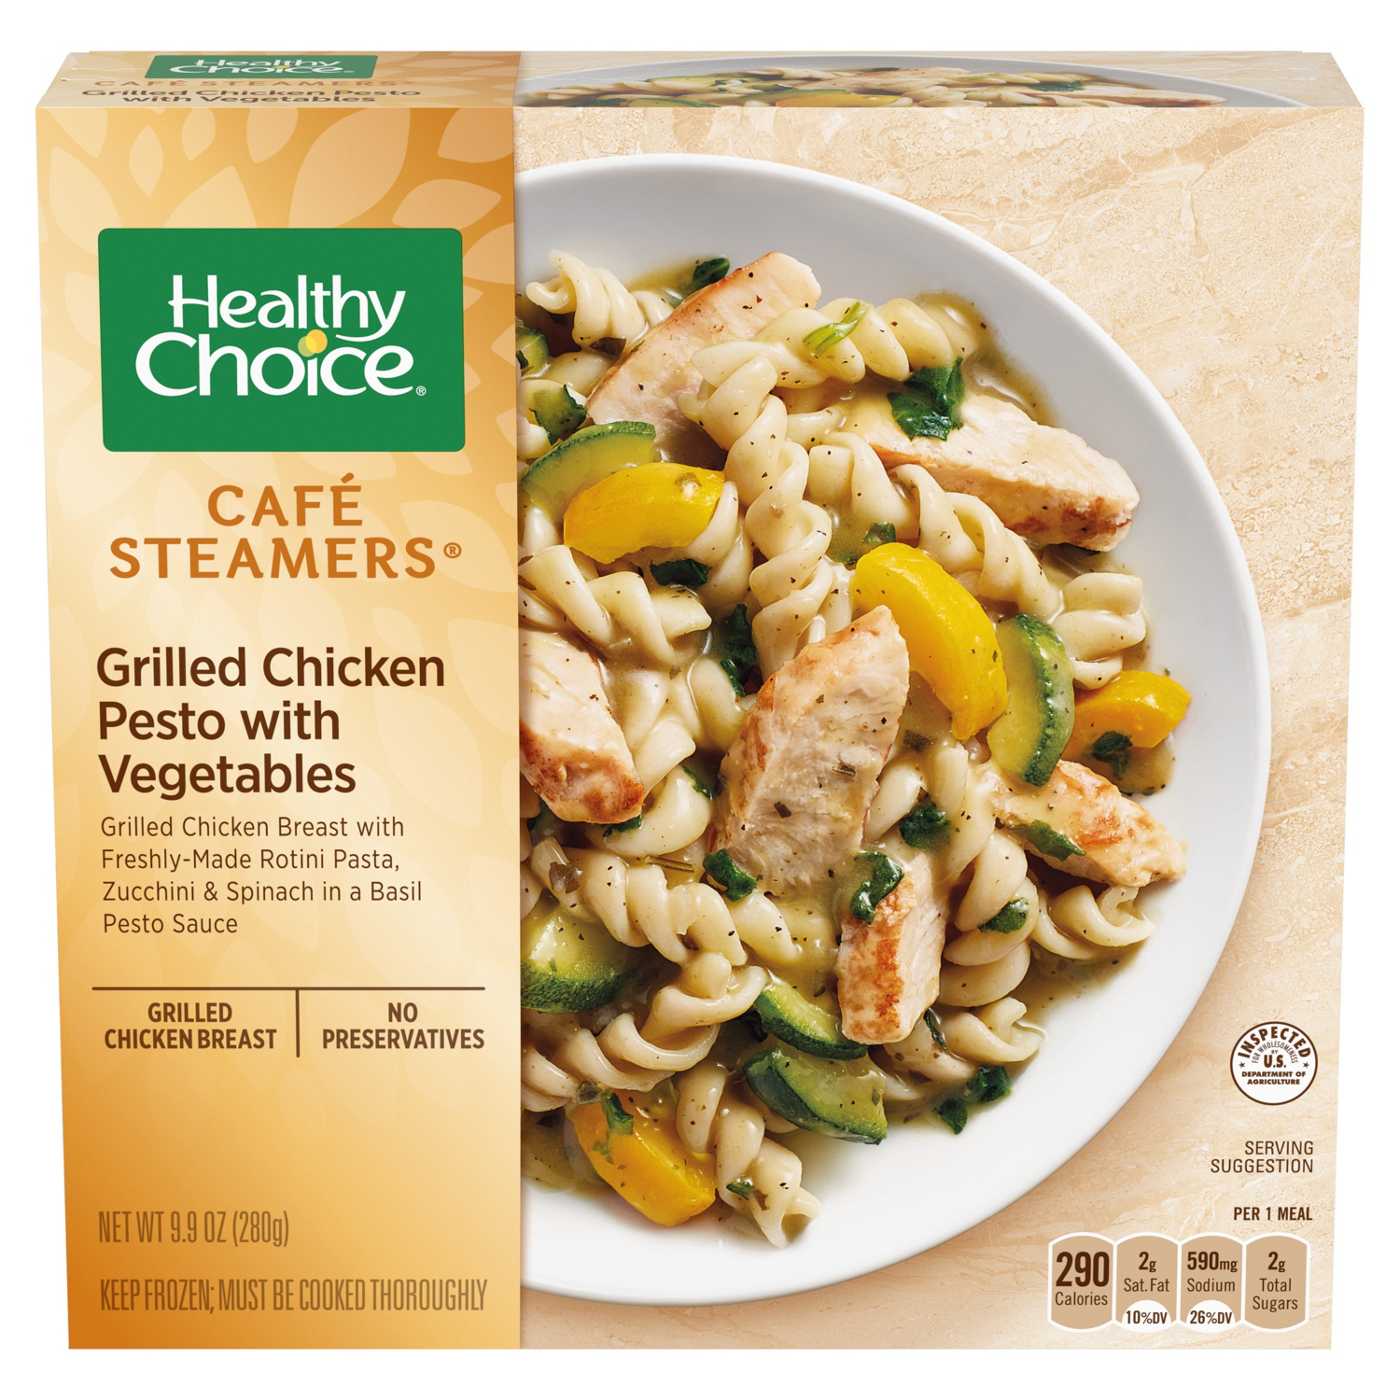 Healthy Choice Café Steamers Grilled Chicken Pesto Frozen Meal; image 1 of 7